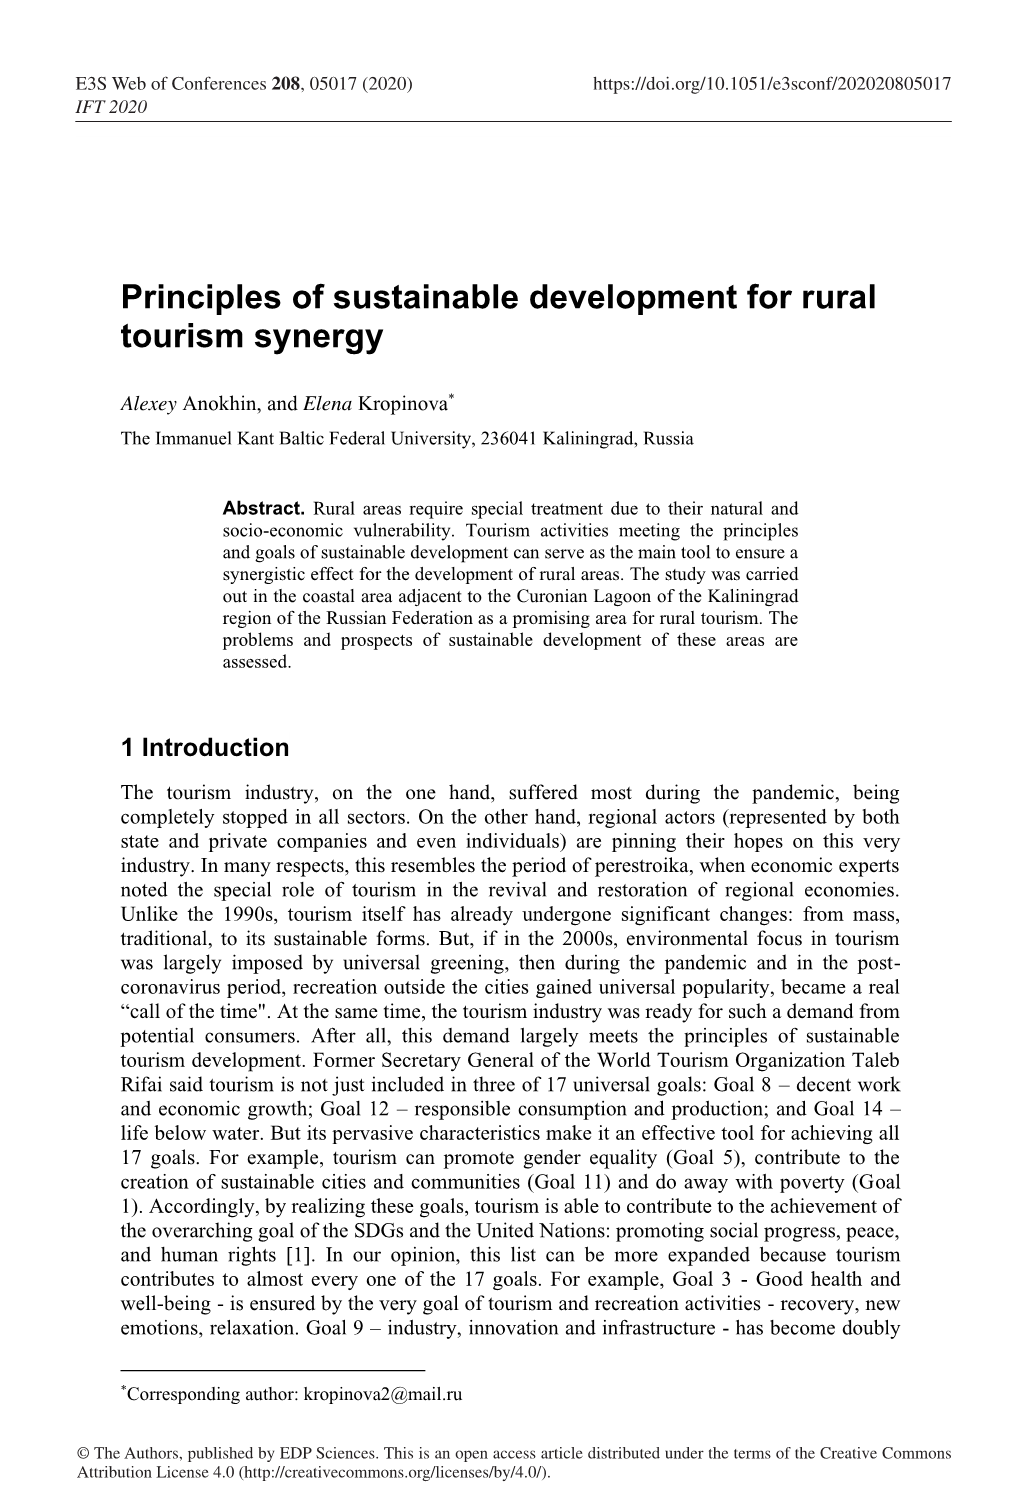 Principles of Sustainable Development for Rural Tourism Synergy